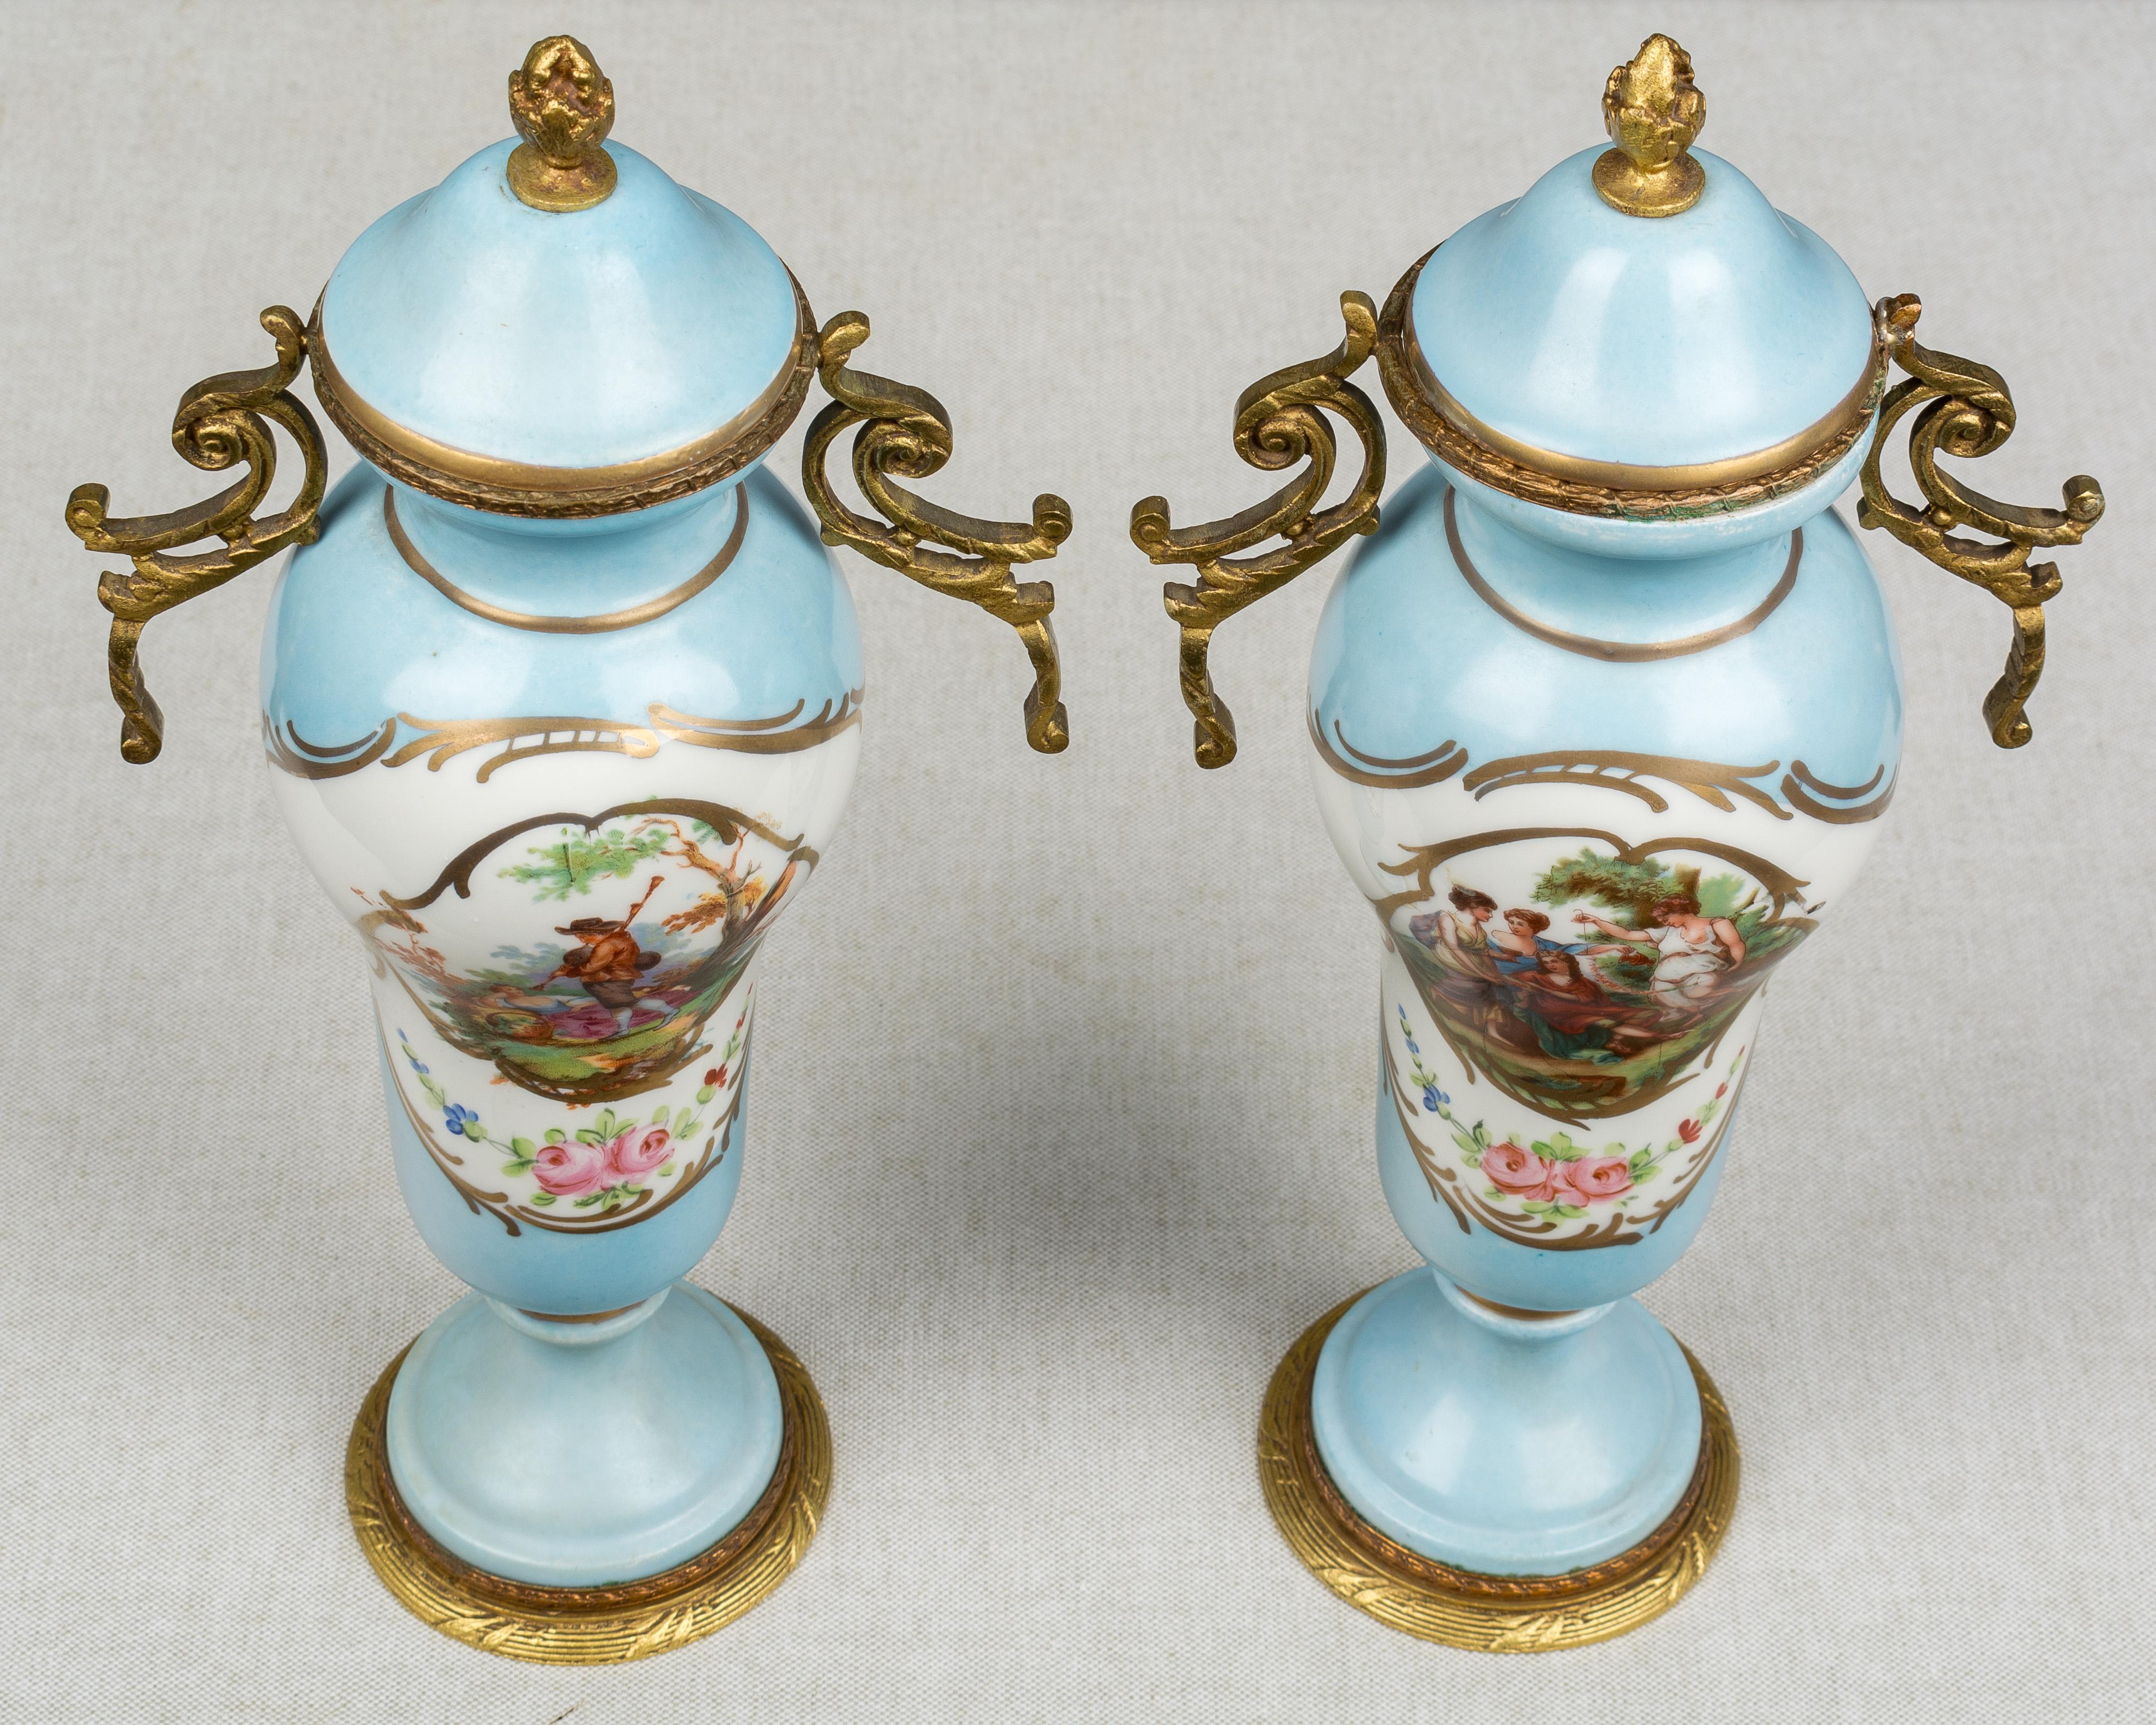 Pair of French Sèvres Porcelain Urns 2